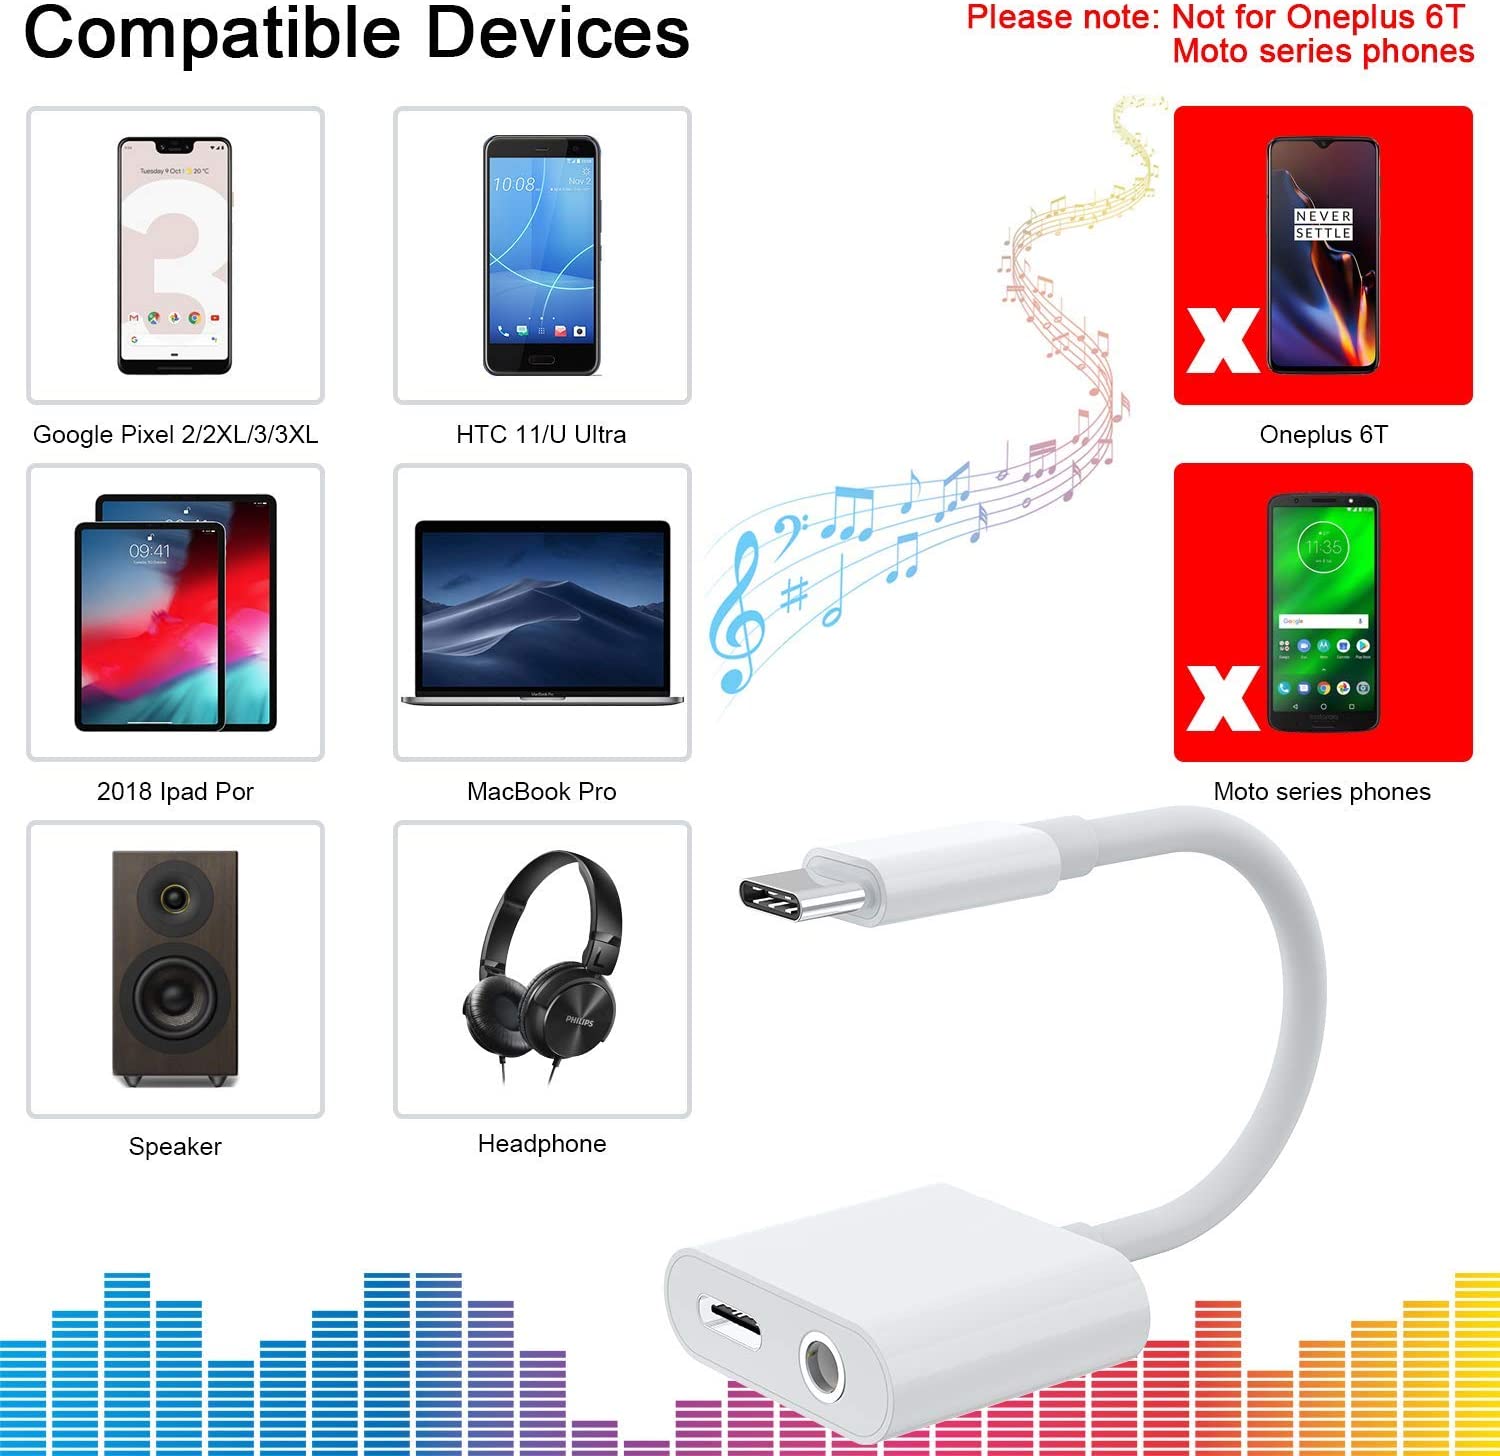 HF-UC235UC: USB C to Headphone Jack Adapter with Type C 3.5mm Aux Audio and Charge Adapter Compatible with Pixel 2/2XL/3/3Xl, Galaxy Note 10, iPad Pro 2018, and More